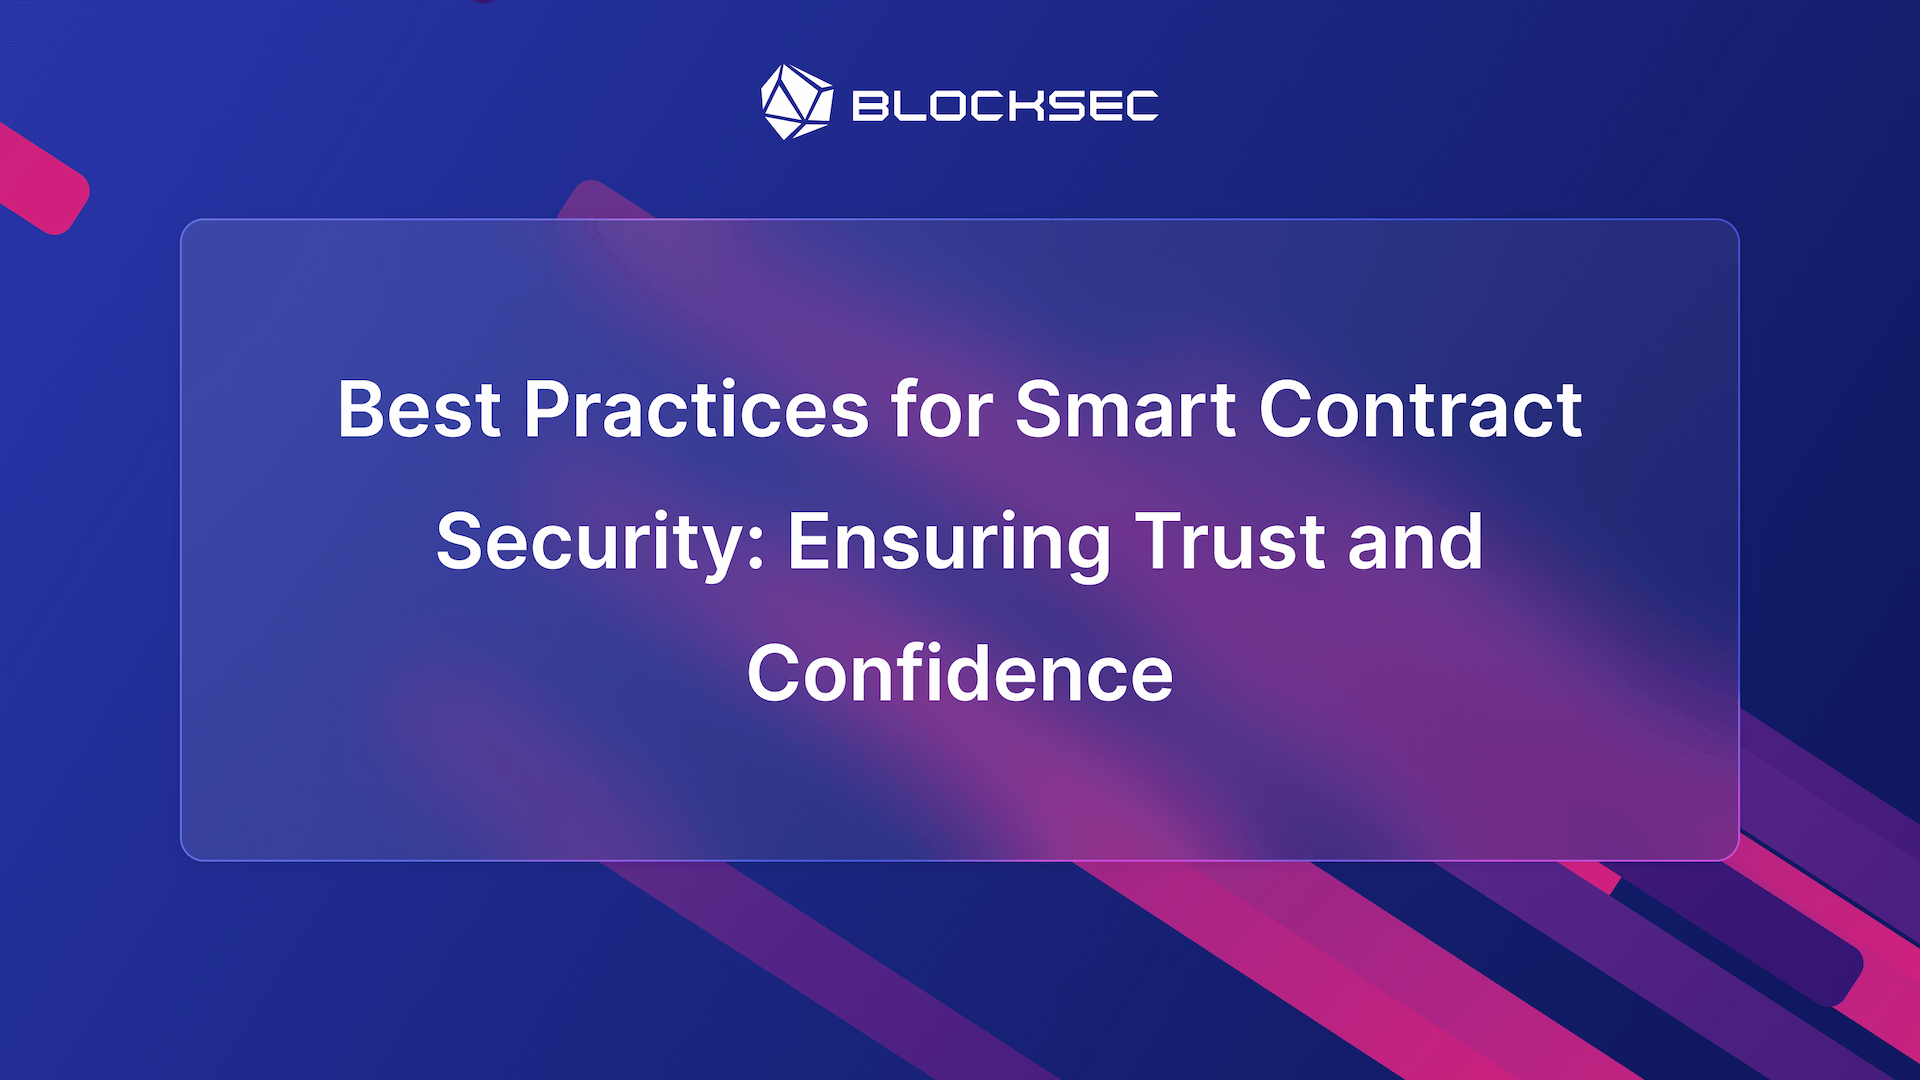 Best Practices for Smart Contract Security: Ensuring Trust and Confidence